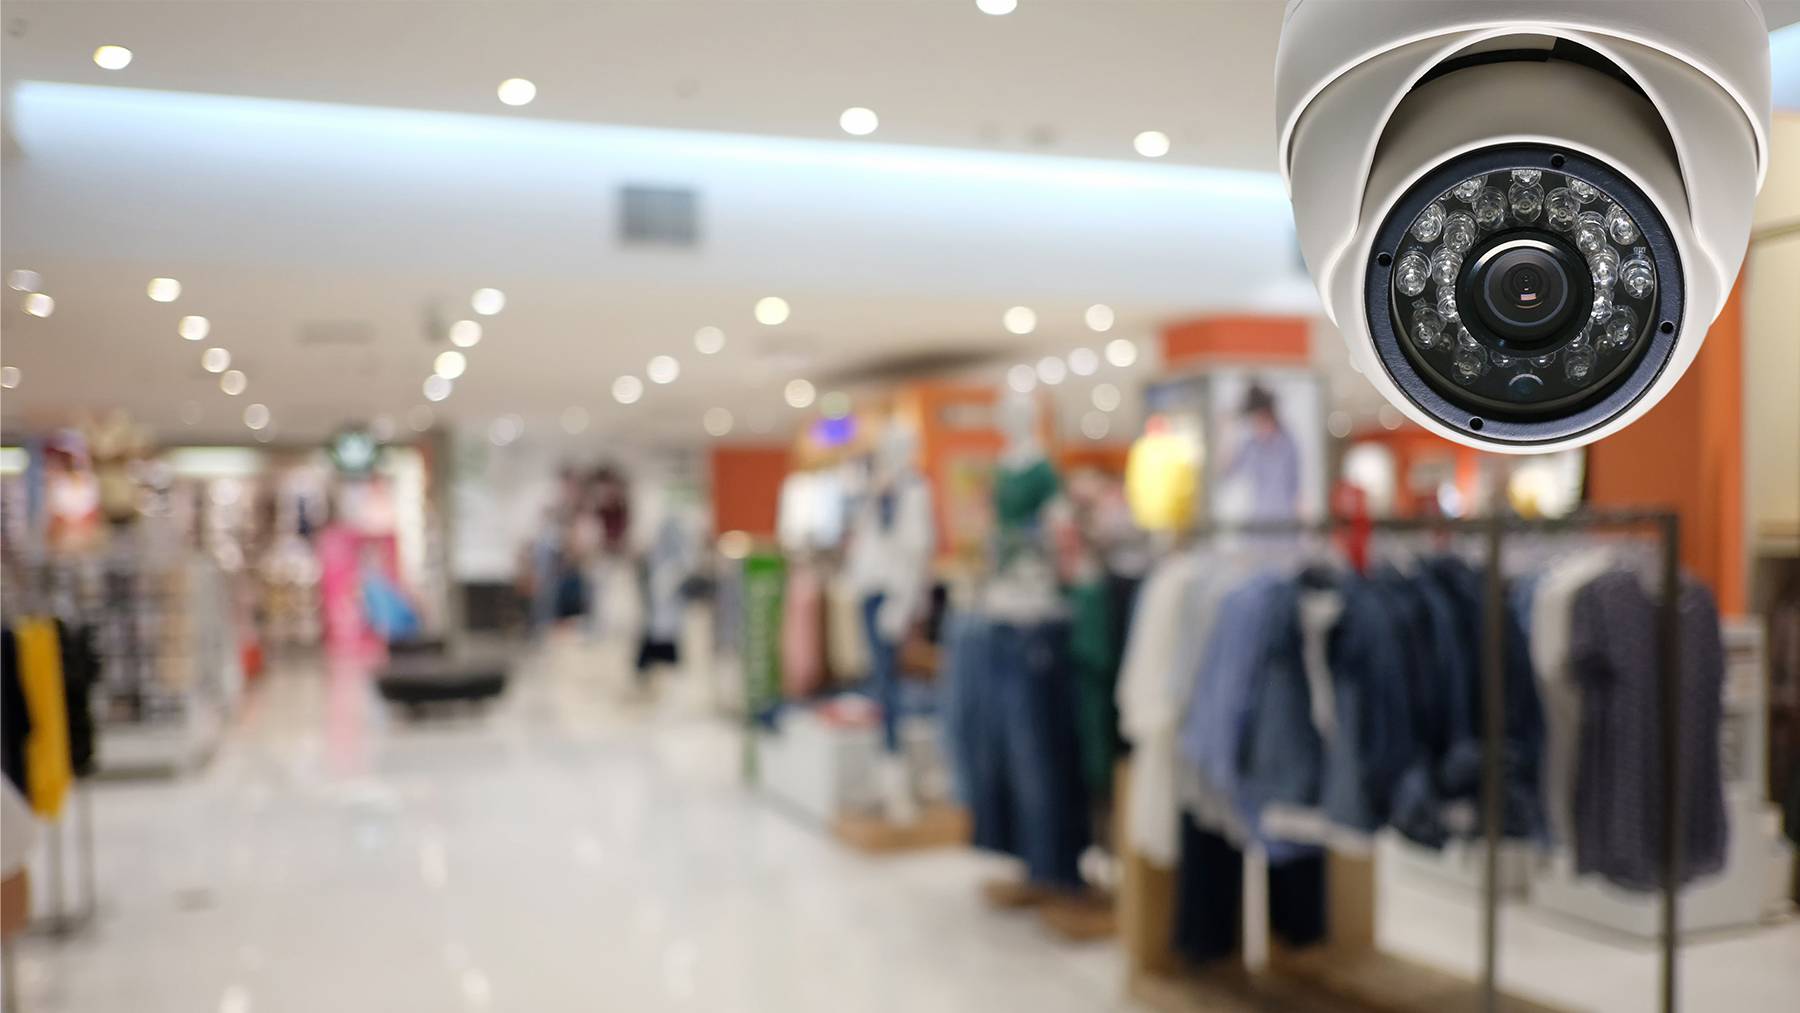 To ward off inventory and profit losses caused by shoplifting, some retailers are installing advanced security cameras as well as attaching RFID tags to merchandise.